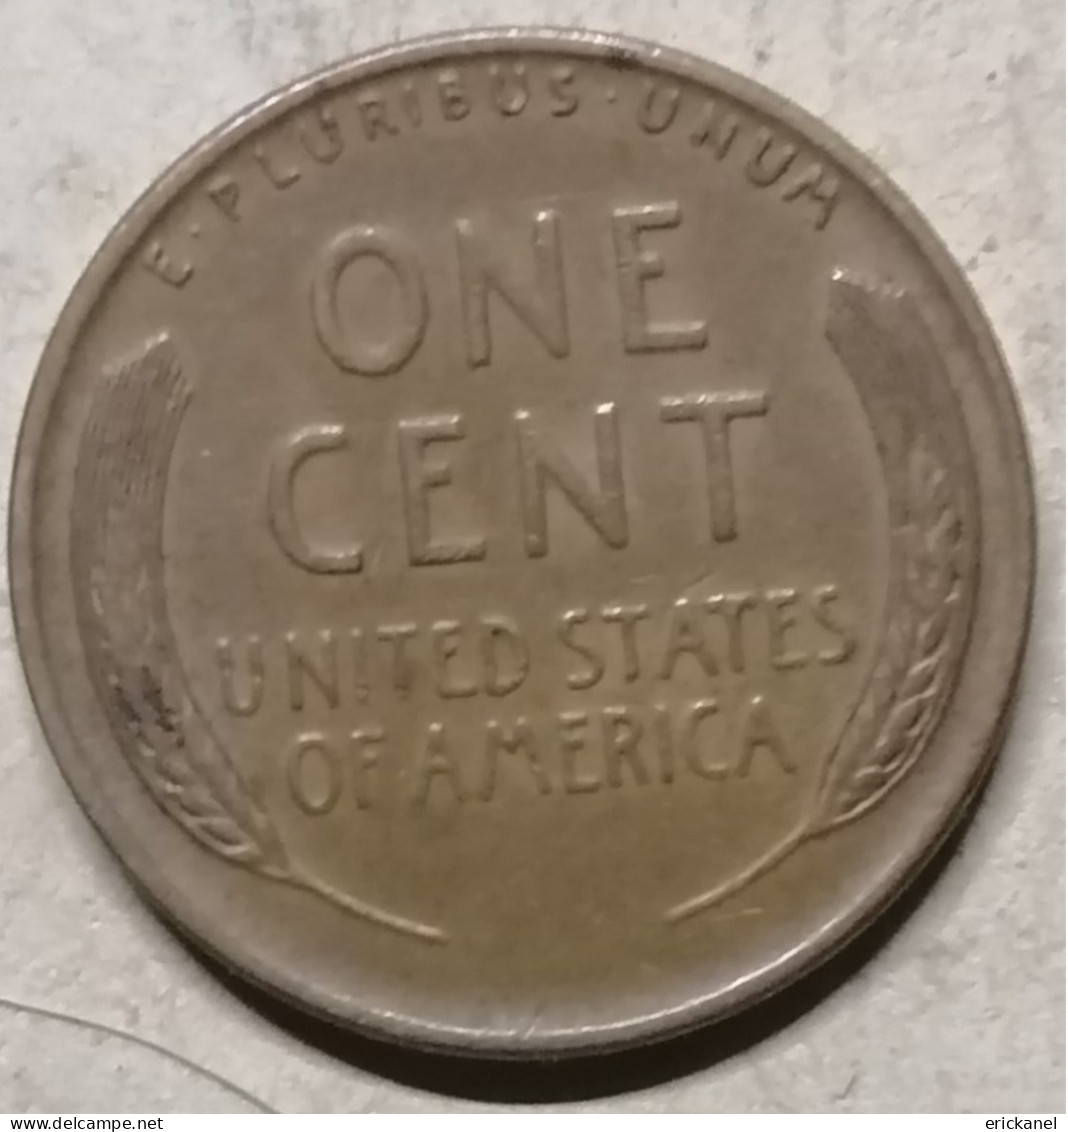 USA 1 CENT 1942 - 1909-1958: Lincoln, Wheat Ears Reverse